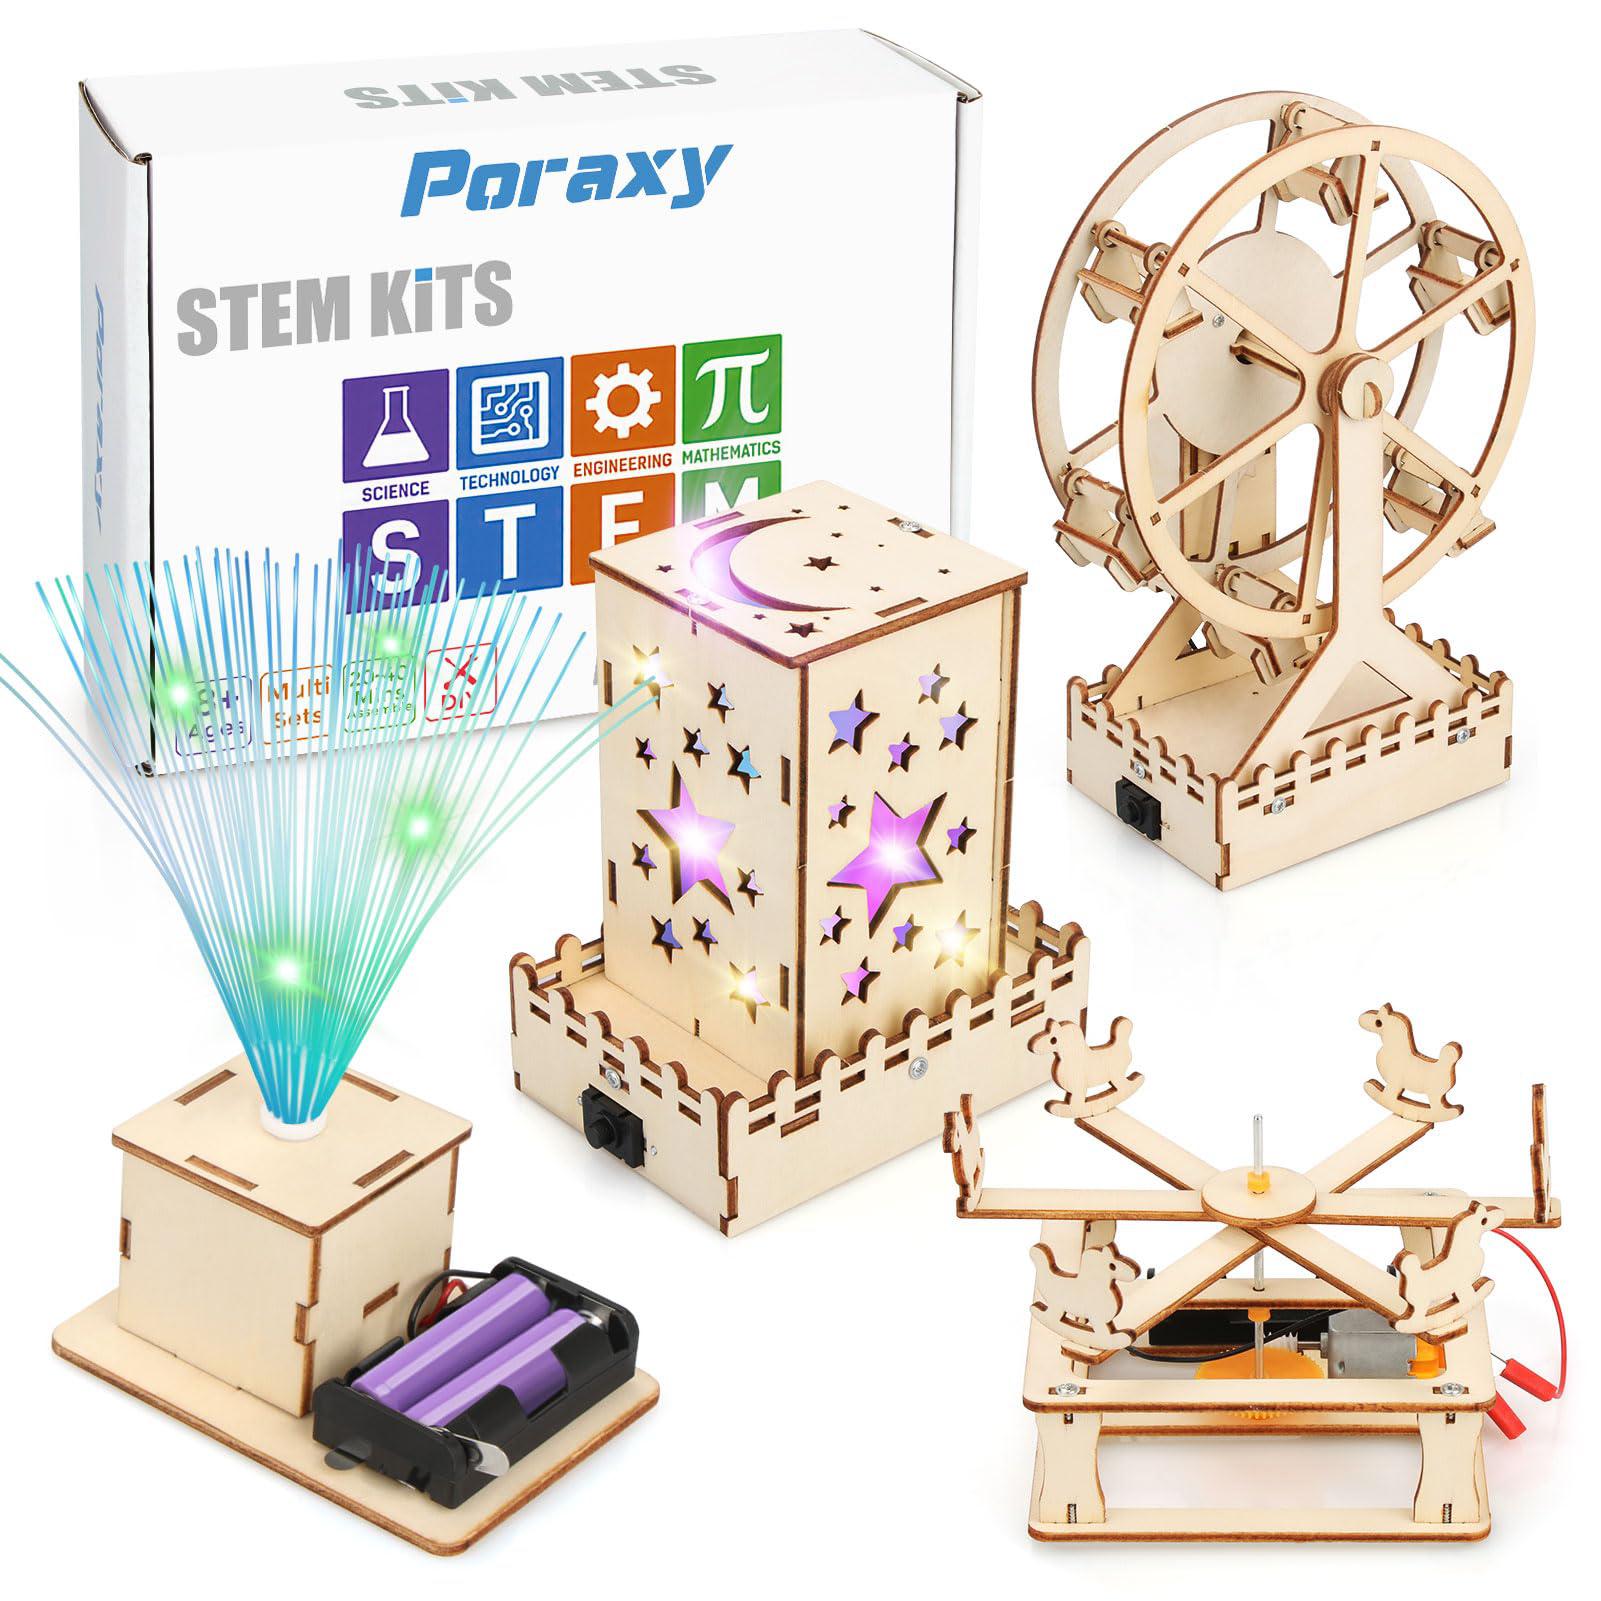 Poraxy 4 in 1 stem kits, wooden construction science kits, stem projects  for kids ages 8-12, 3d puzzles, diy educational craft build